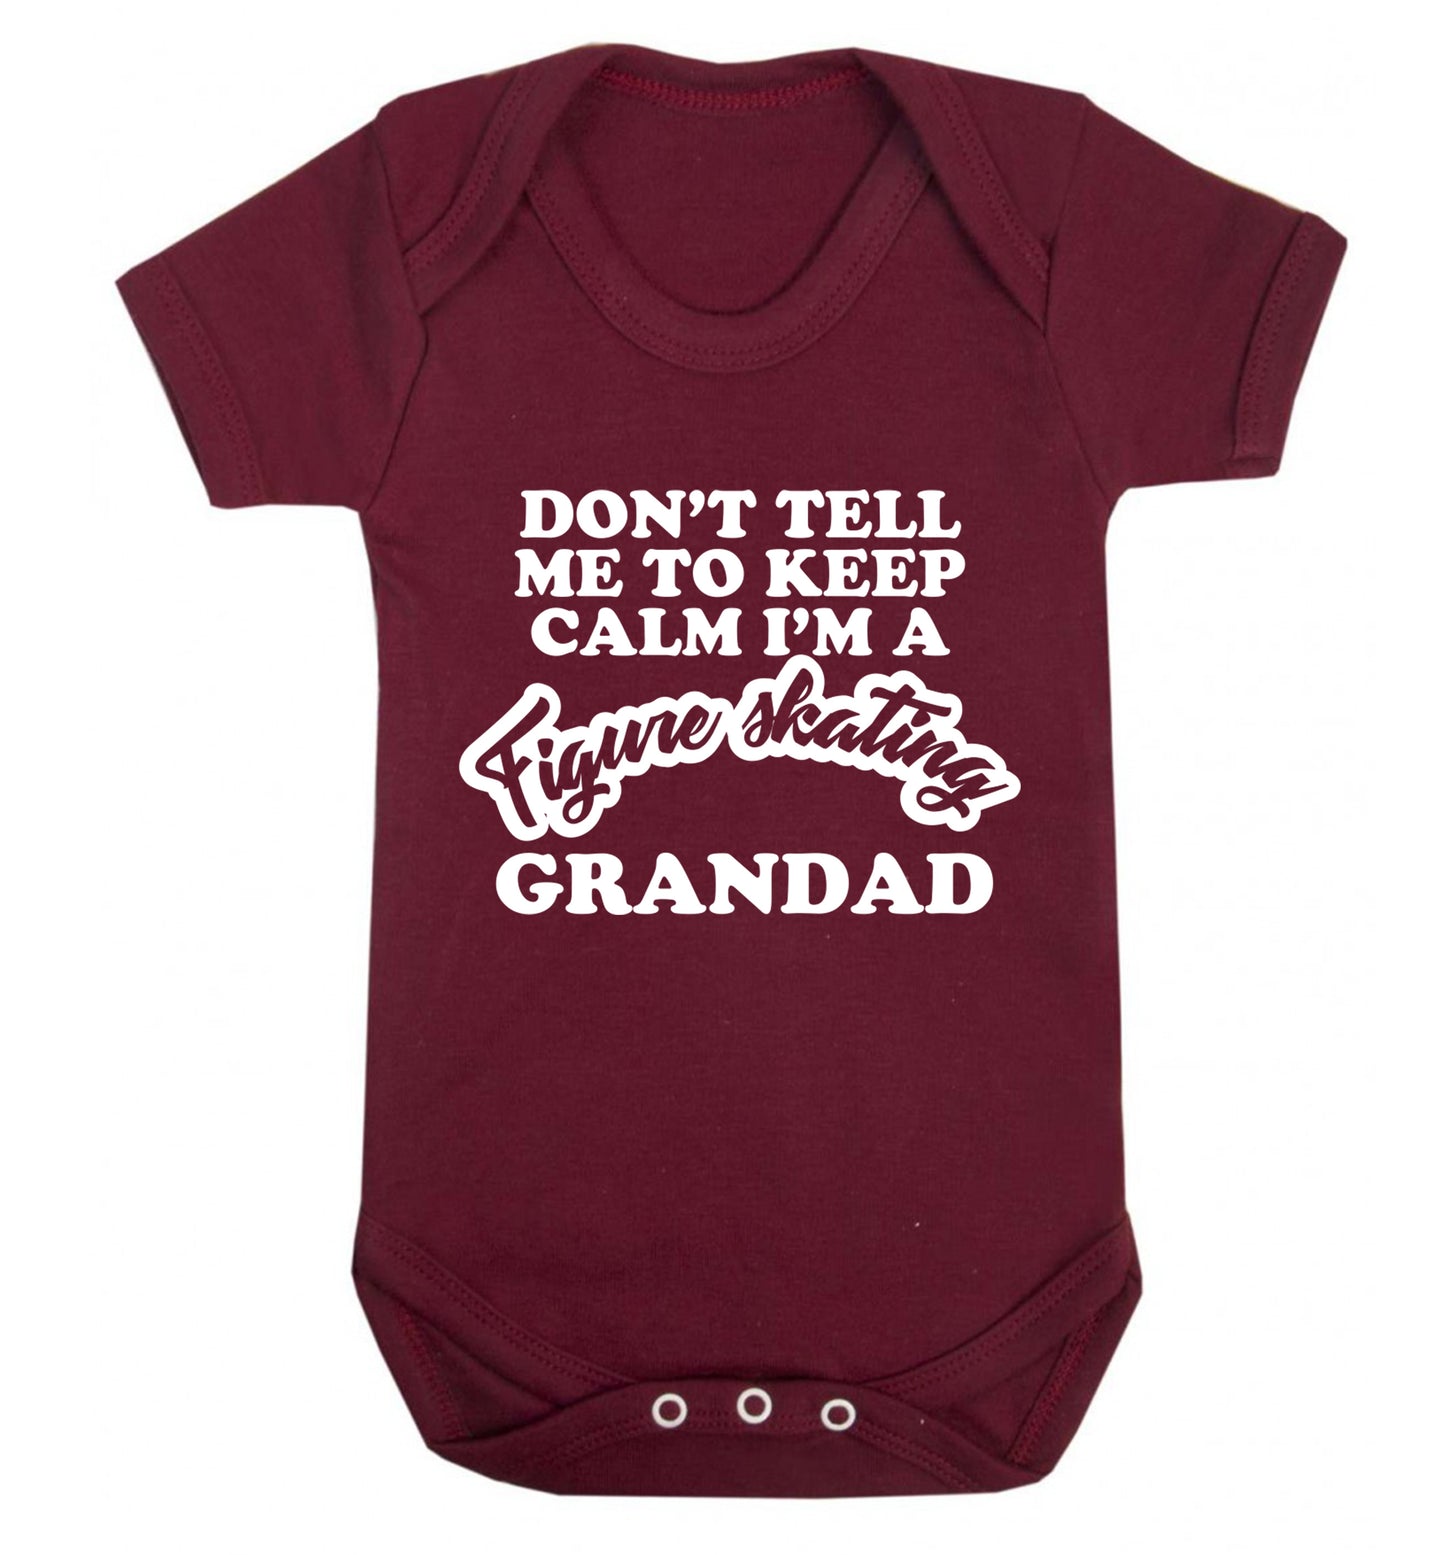 Don't tell me to keep calm I'm a figure skating grandad Baby Vest maroon 18-24 months